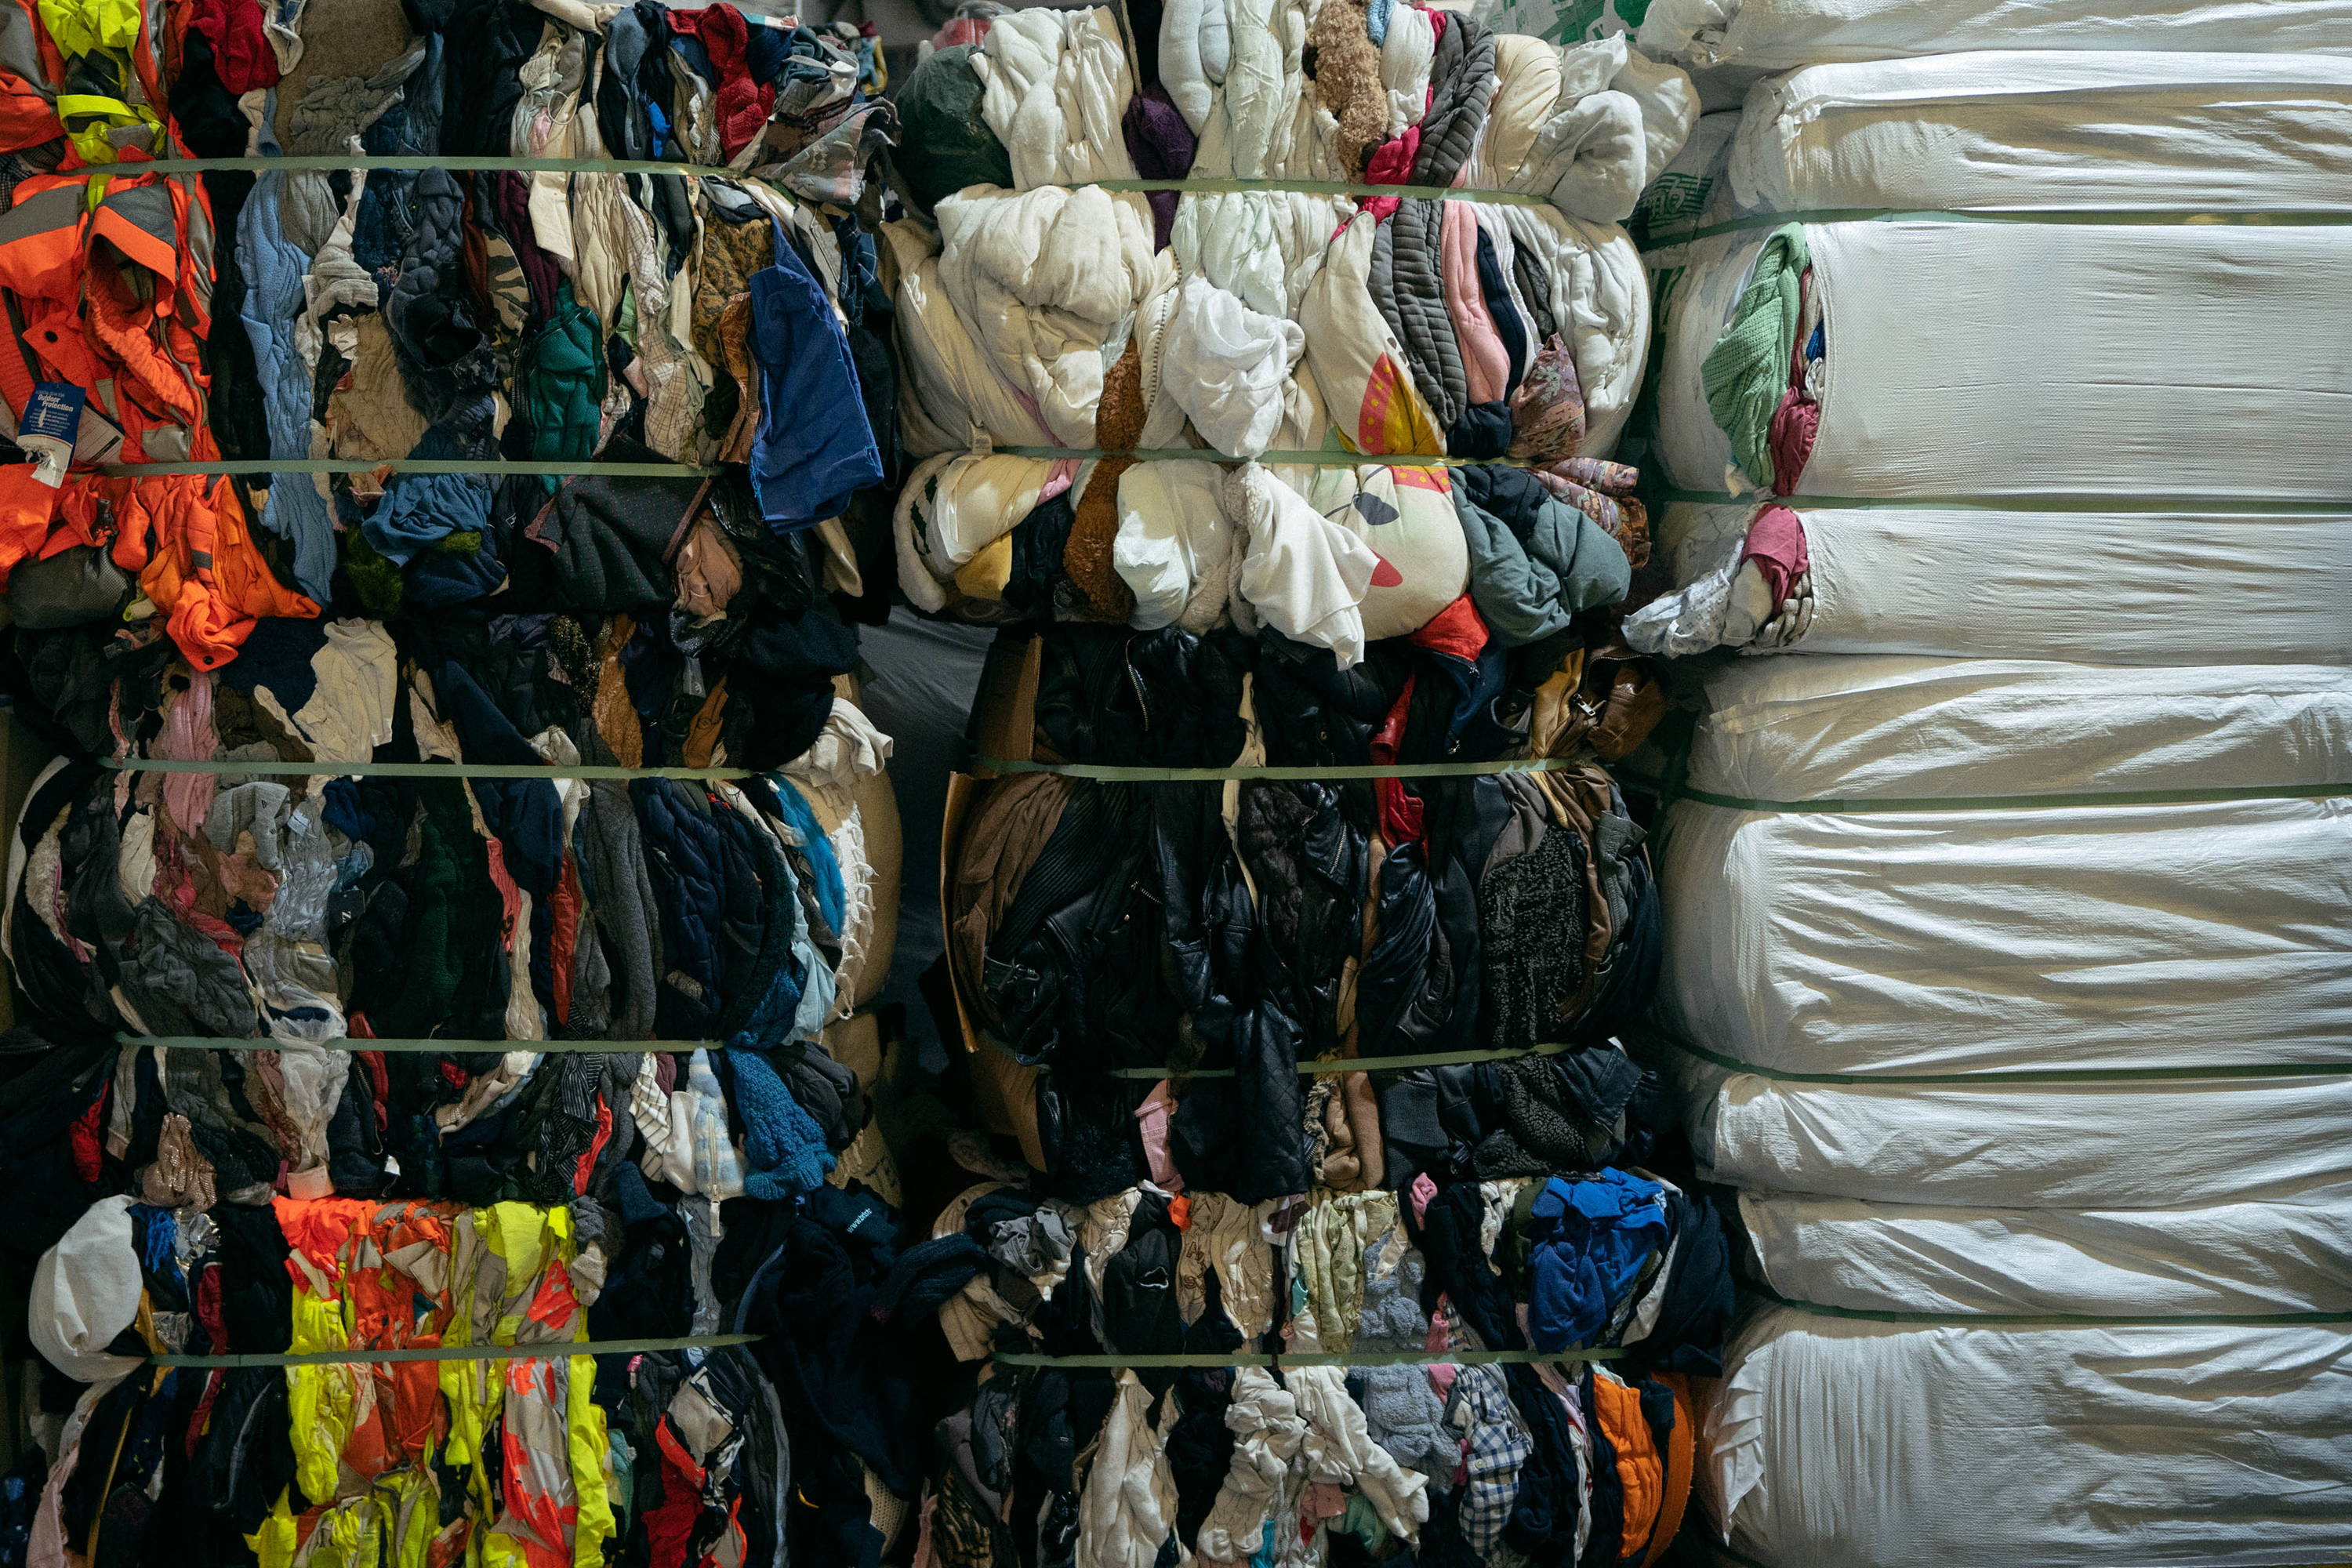 Bales of pre-loved clothes awaiting refurbishment, repair and recycling.